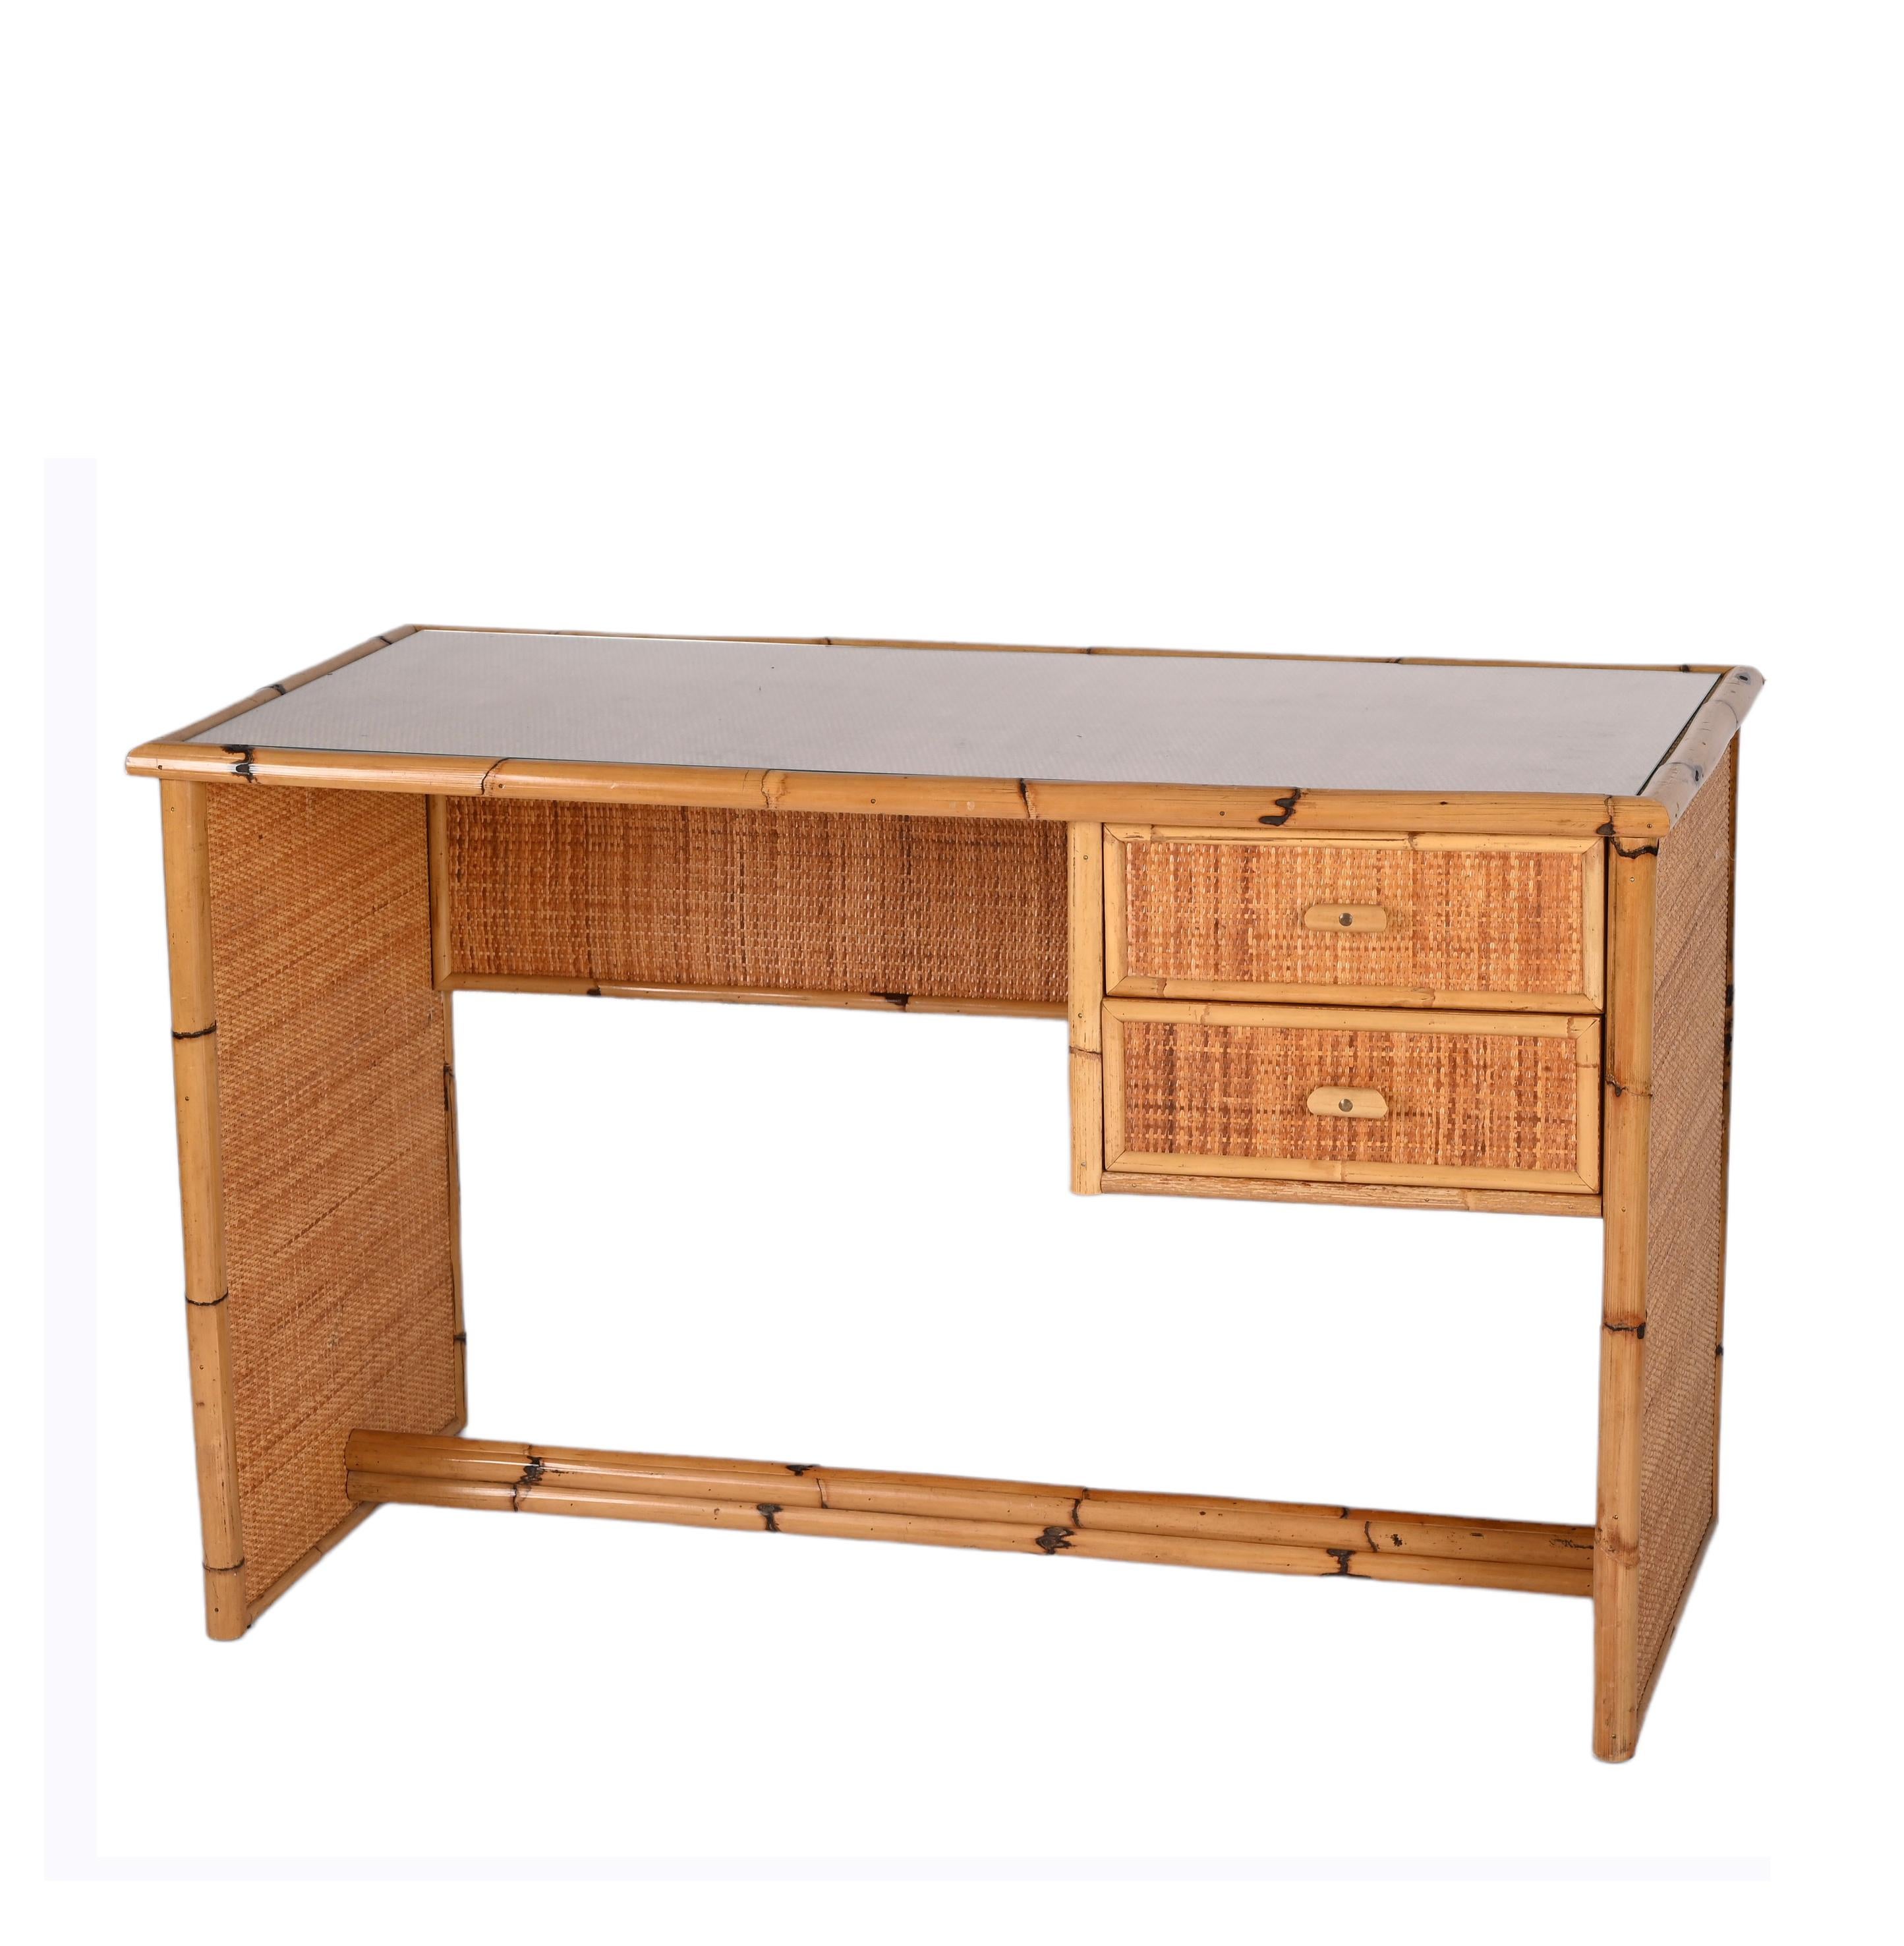 20th Century Midcentury Glass Top, Bamboo and Wicker Italian Desk with Drawers, 1980s For Sale